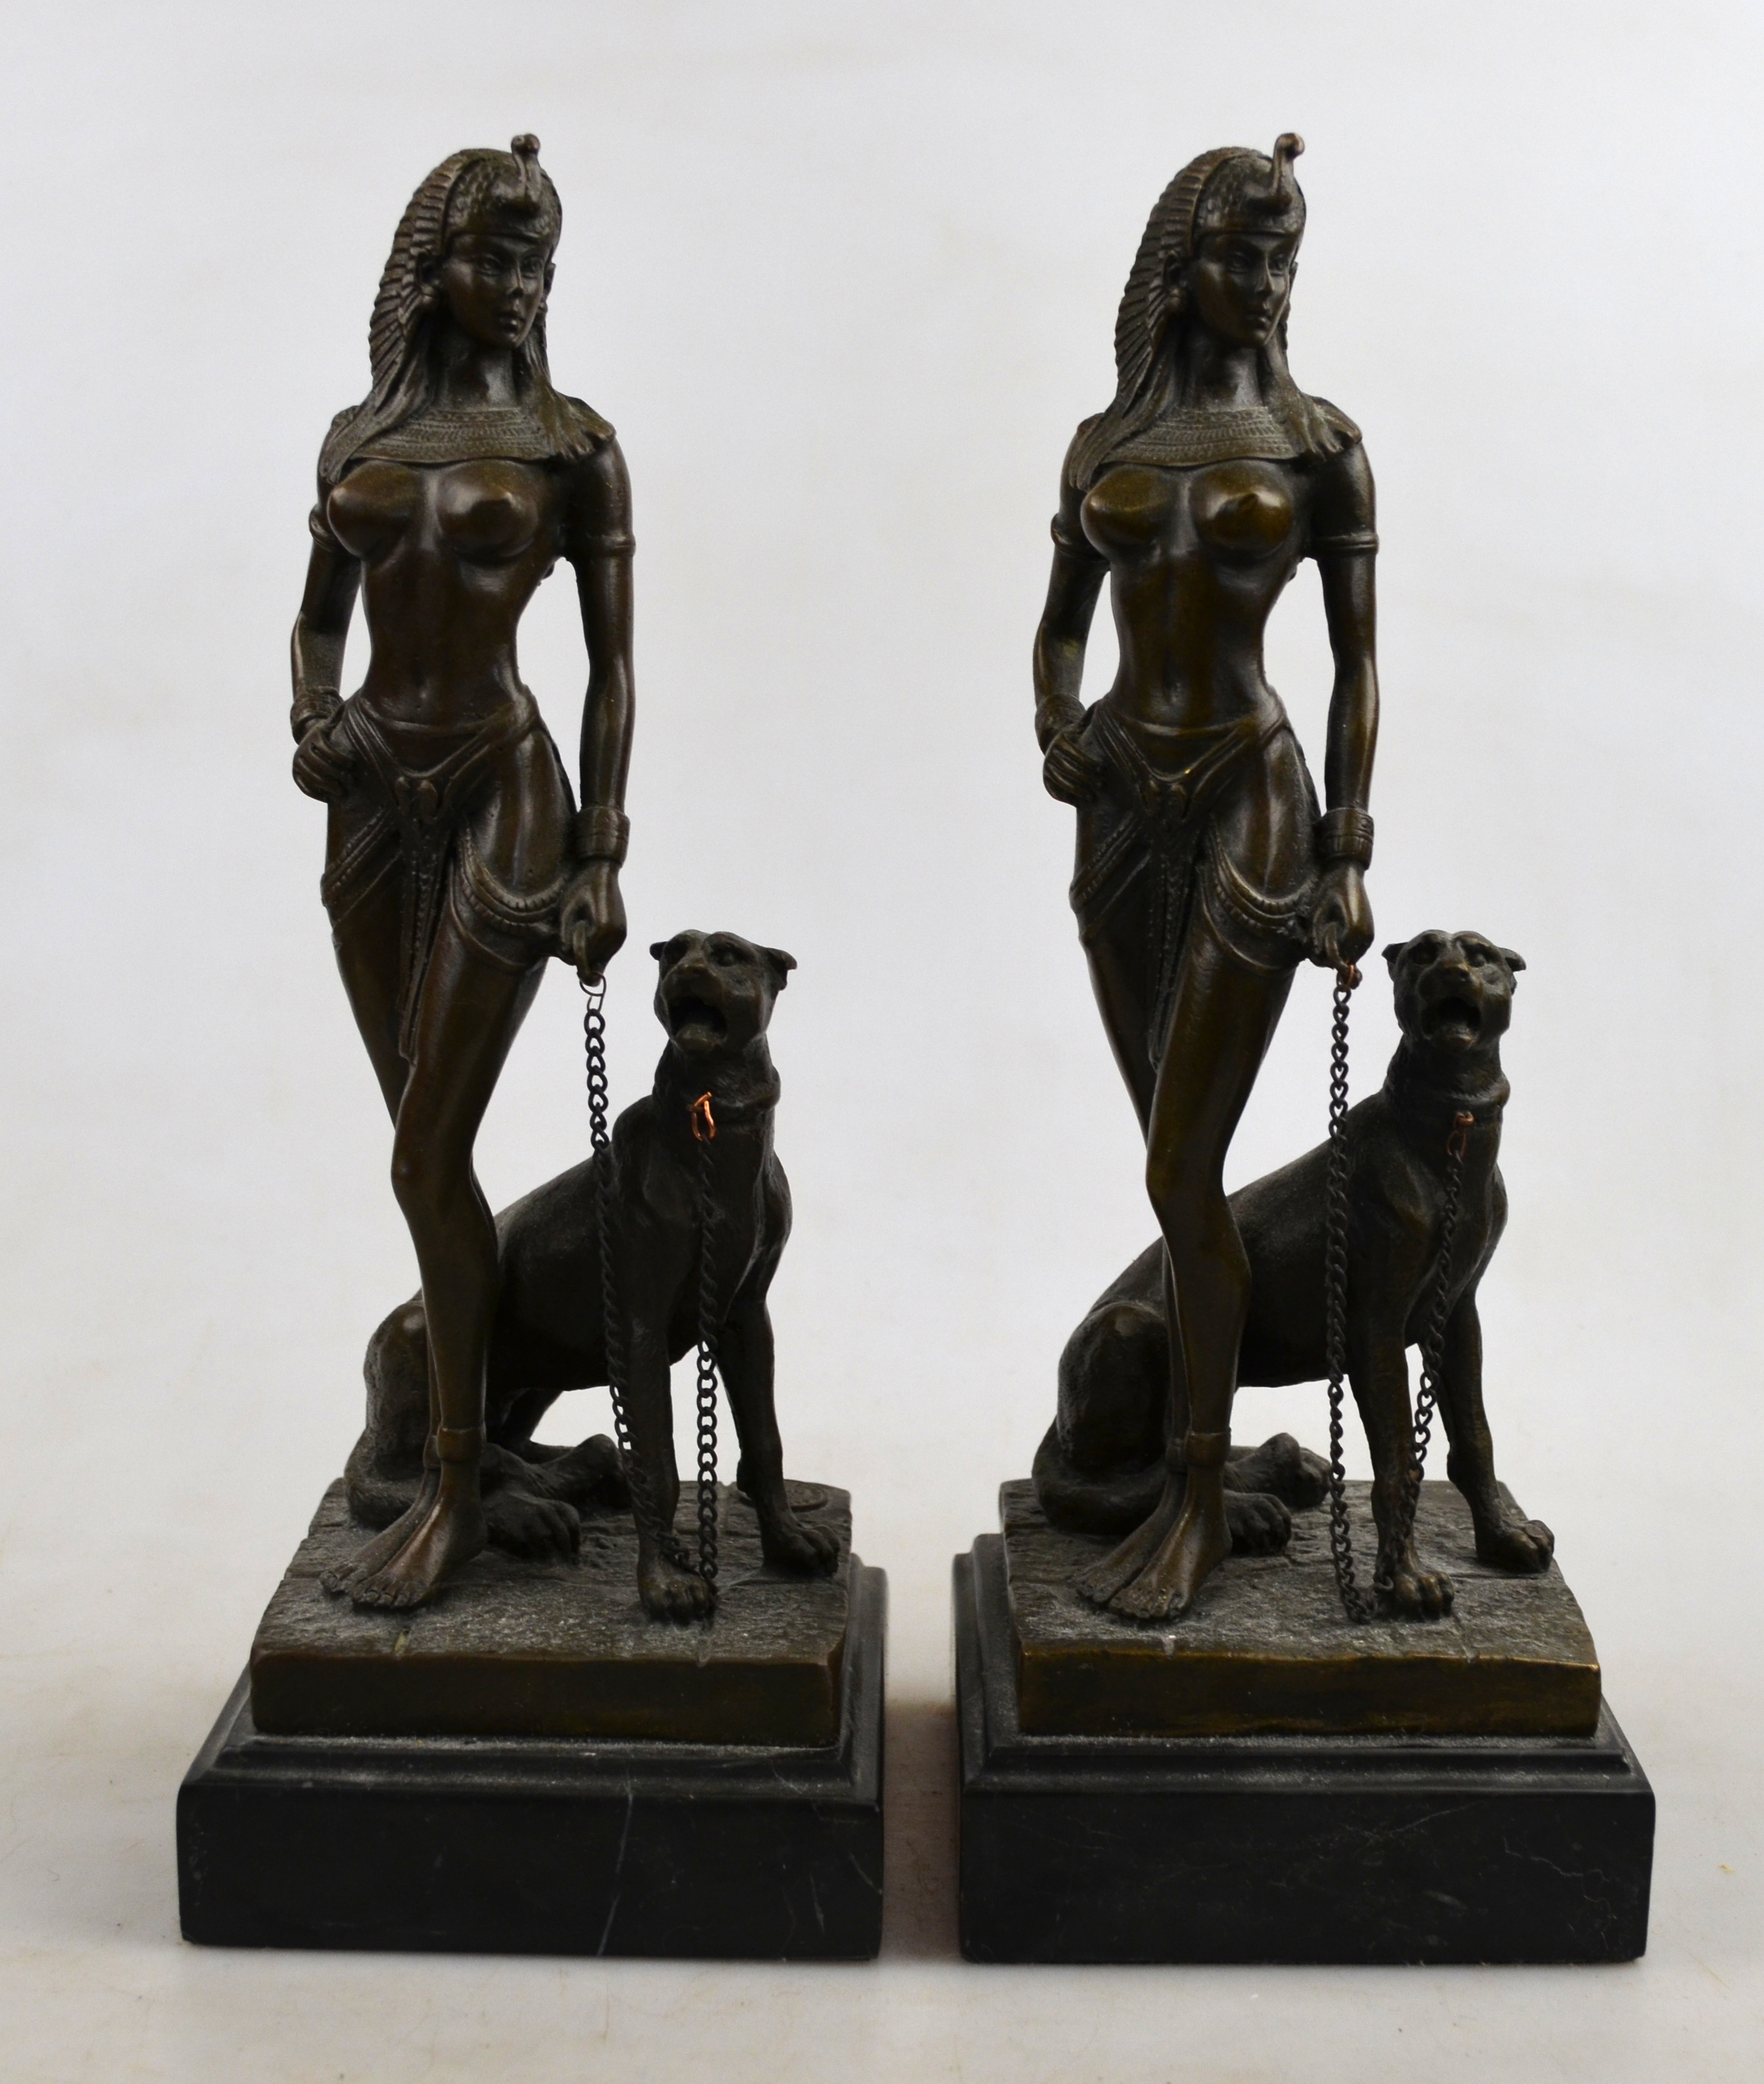 Two brown-patinated bronze figures, Egyptian female nudes with cheetahs, signed Cesaro, 26 cm high